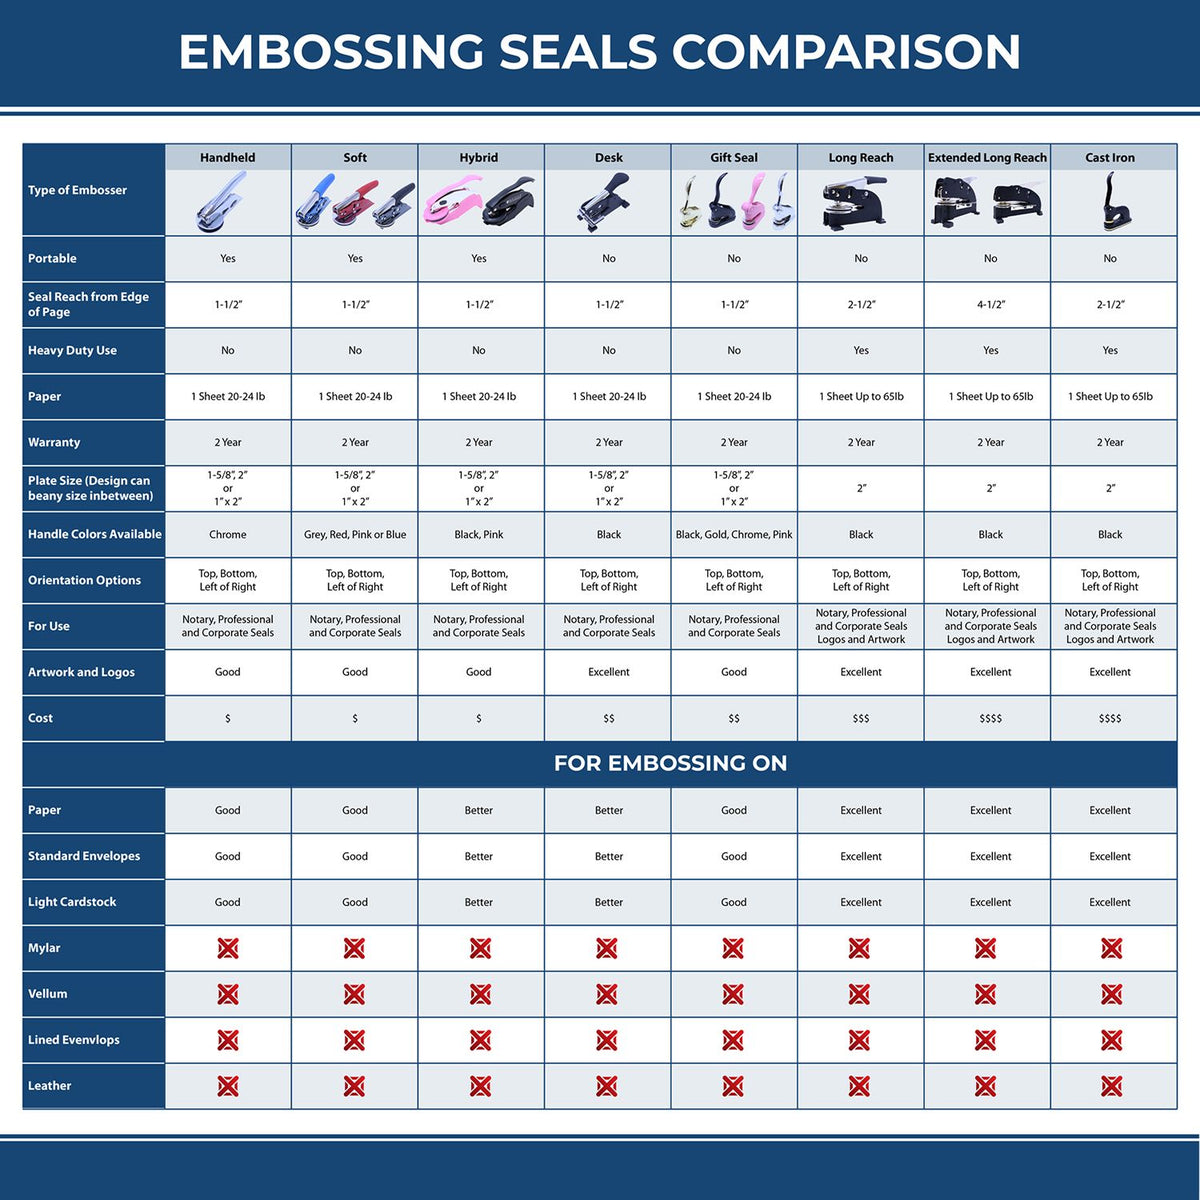 A comparison chart for the different types of mount models available for the Handheld Texas Professional Engineer Embosser.